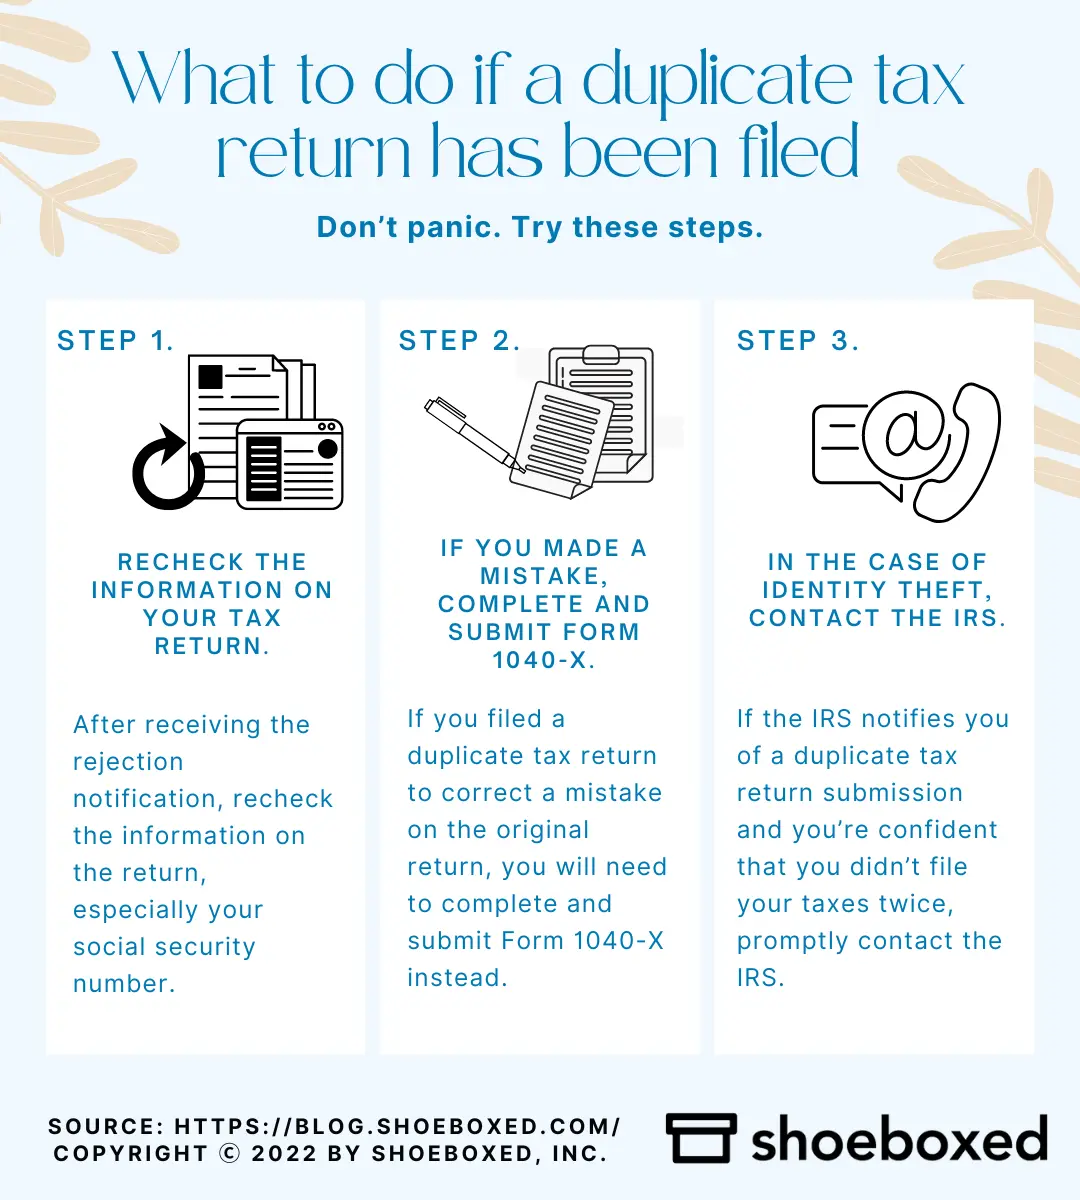 Step-by-step on what to do if a duplicate tax return has been filed